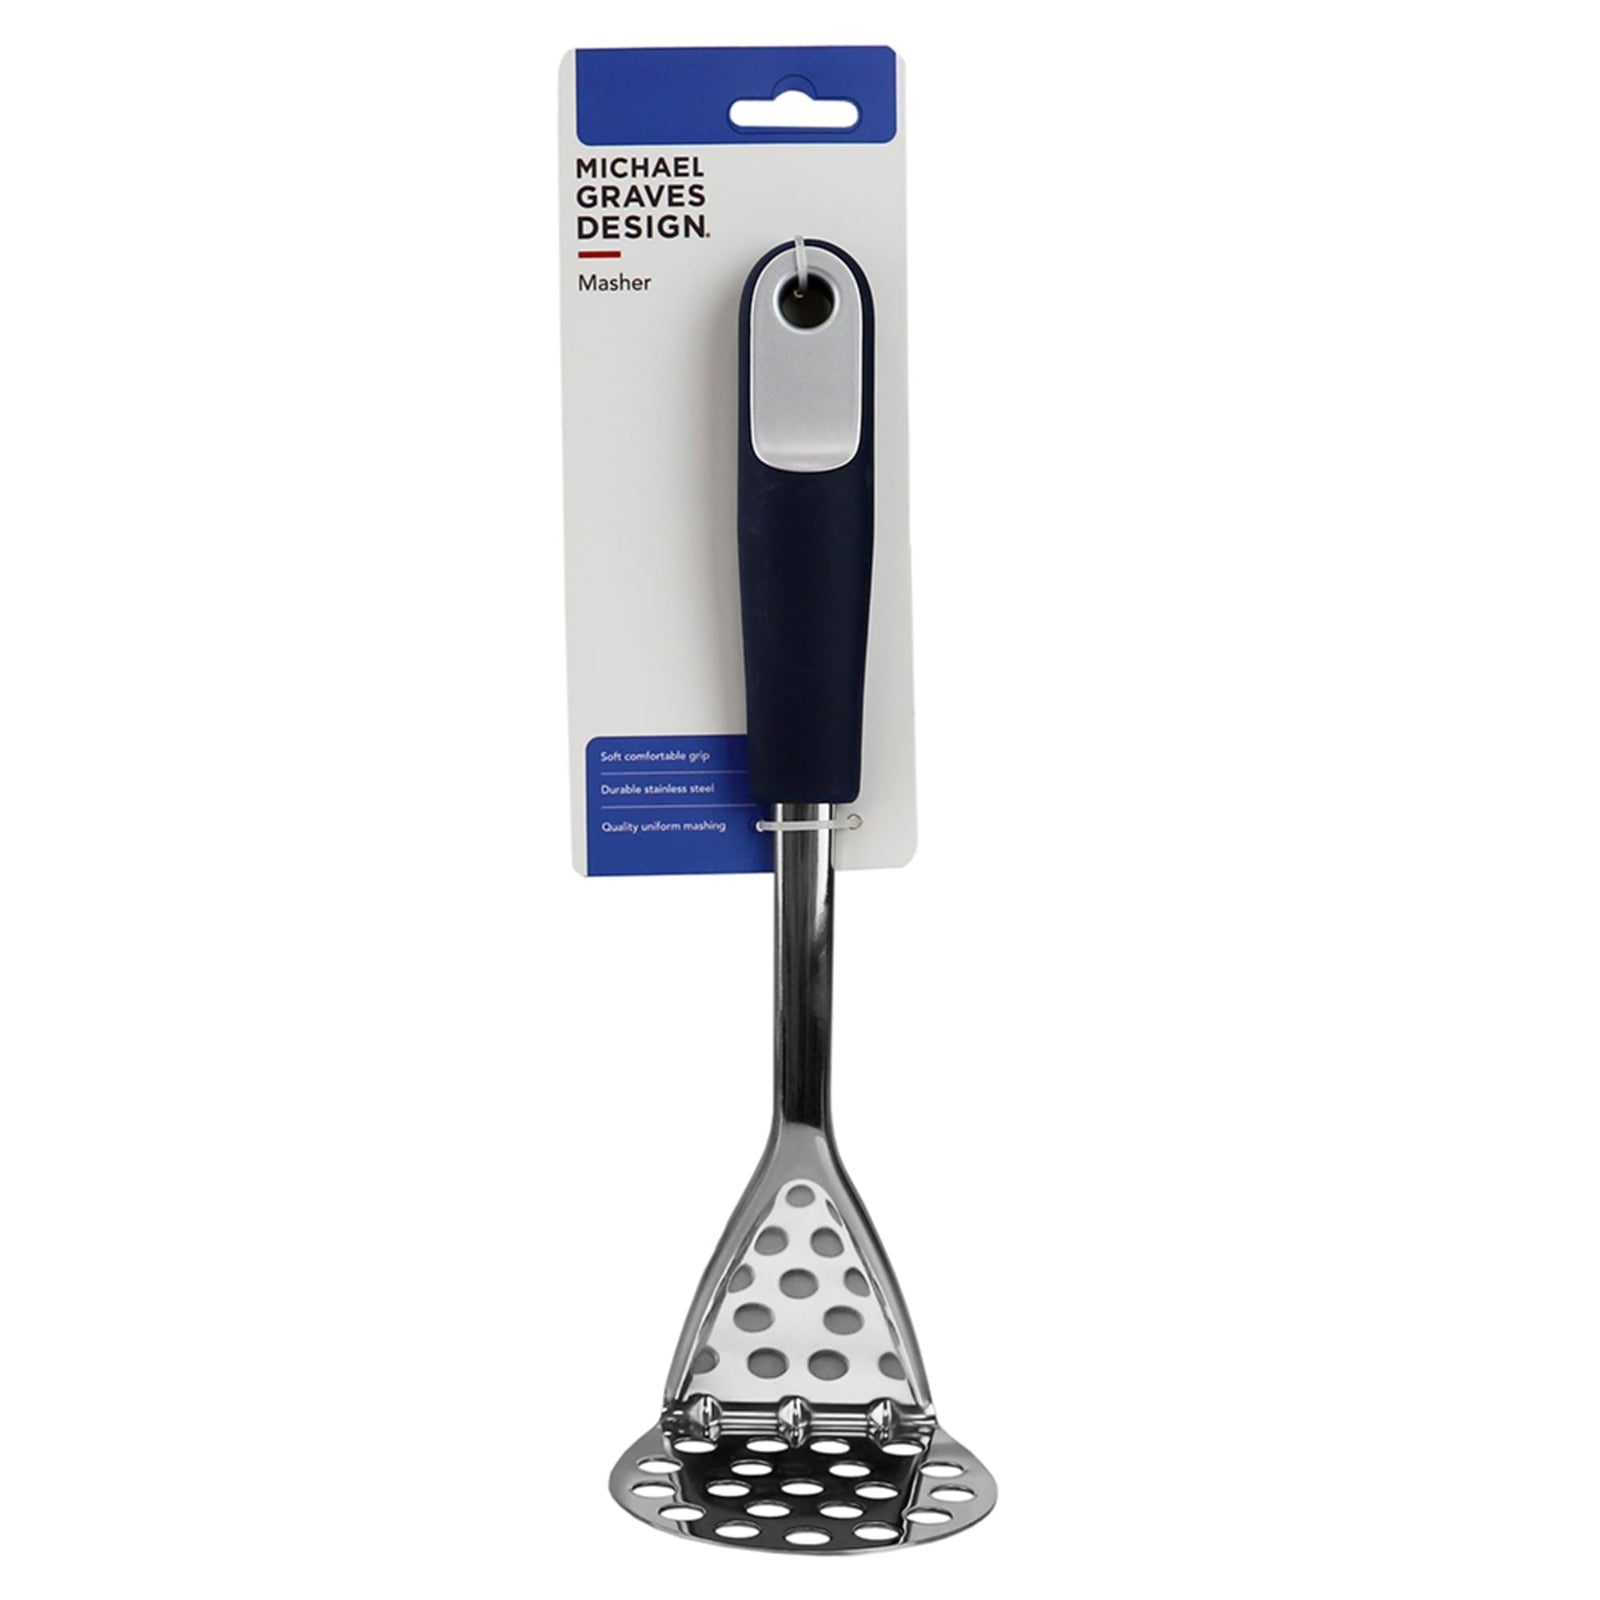 Chef Craft Stainless Steel Small Hole Hand Potato Masher - On Sale